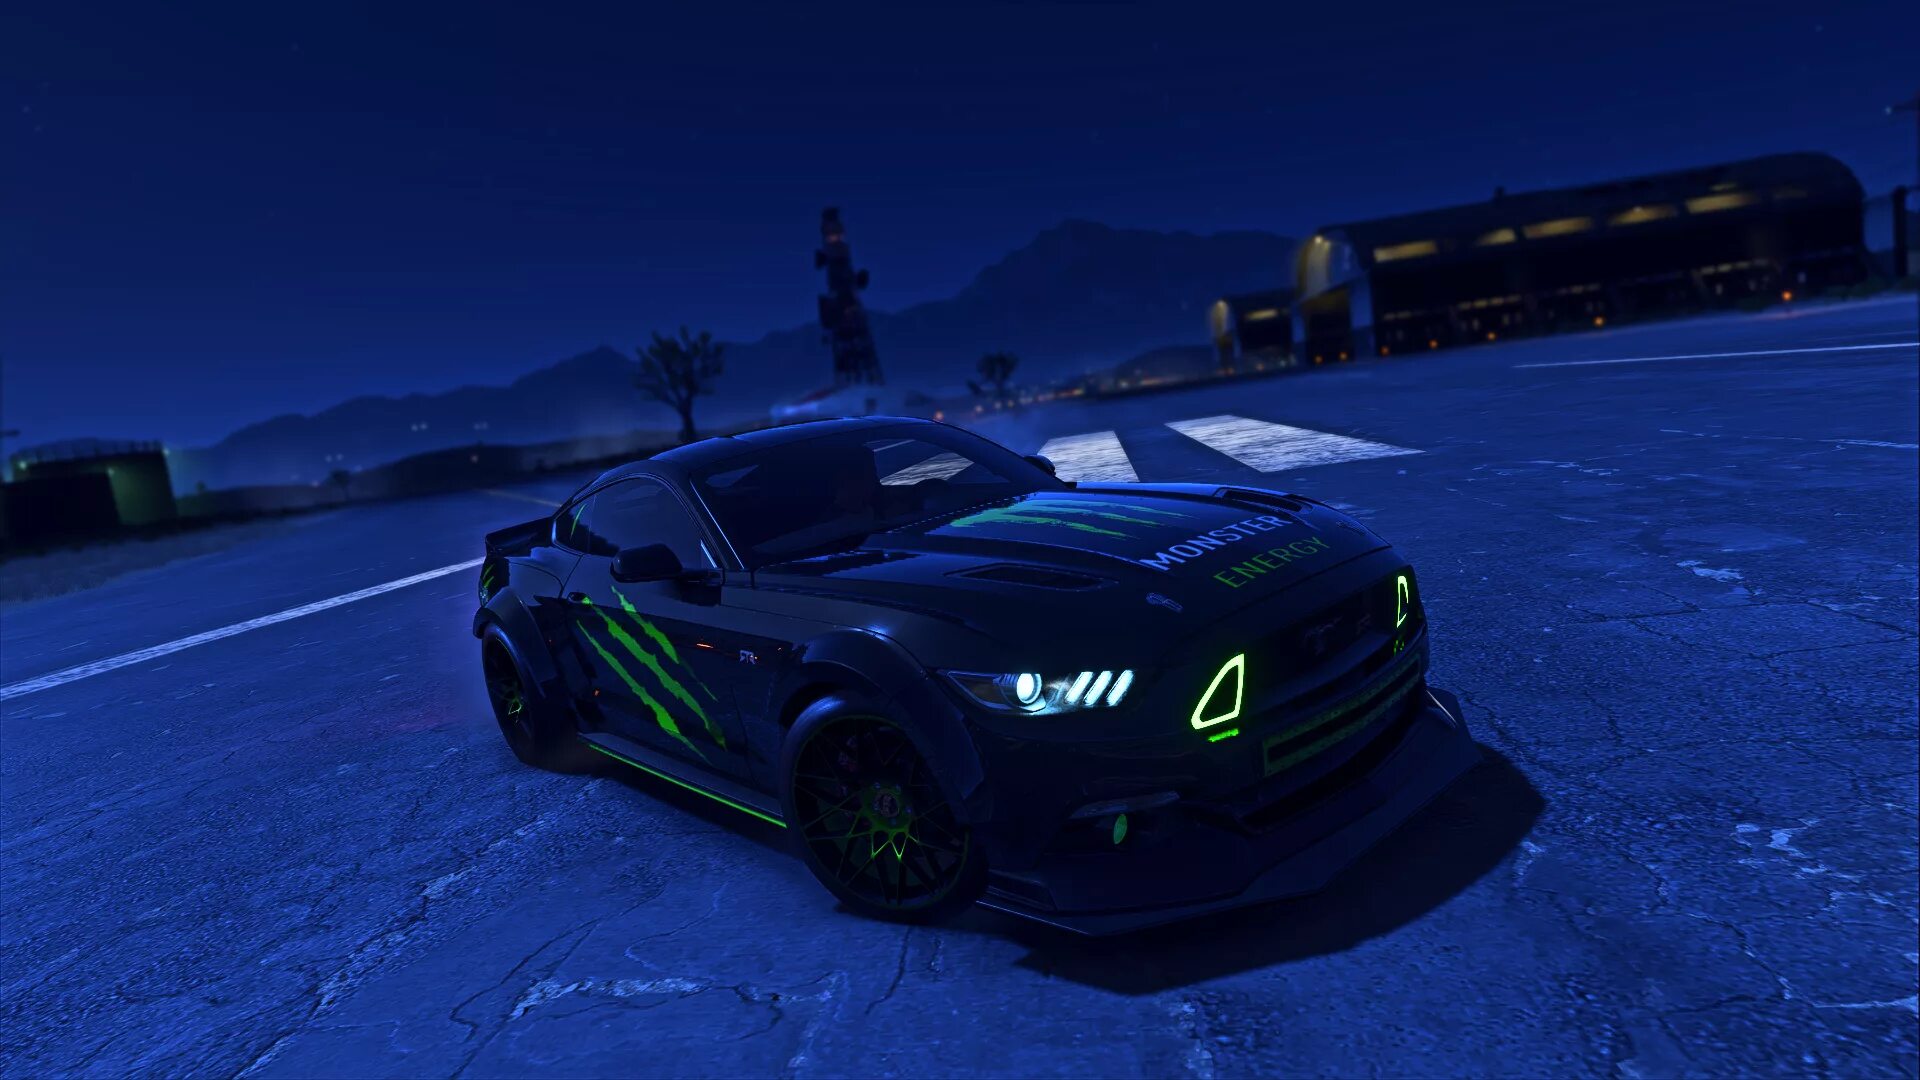 Luminary speed. NFS Payback Мустанг. Мустанг нфс пэйбэк. Need for Speed Payback Ford Mustang. Ford Mustang gt неон.